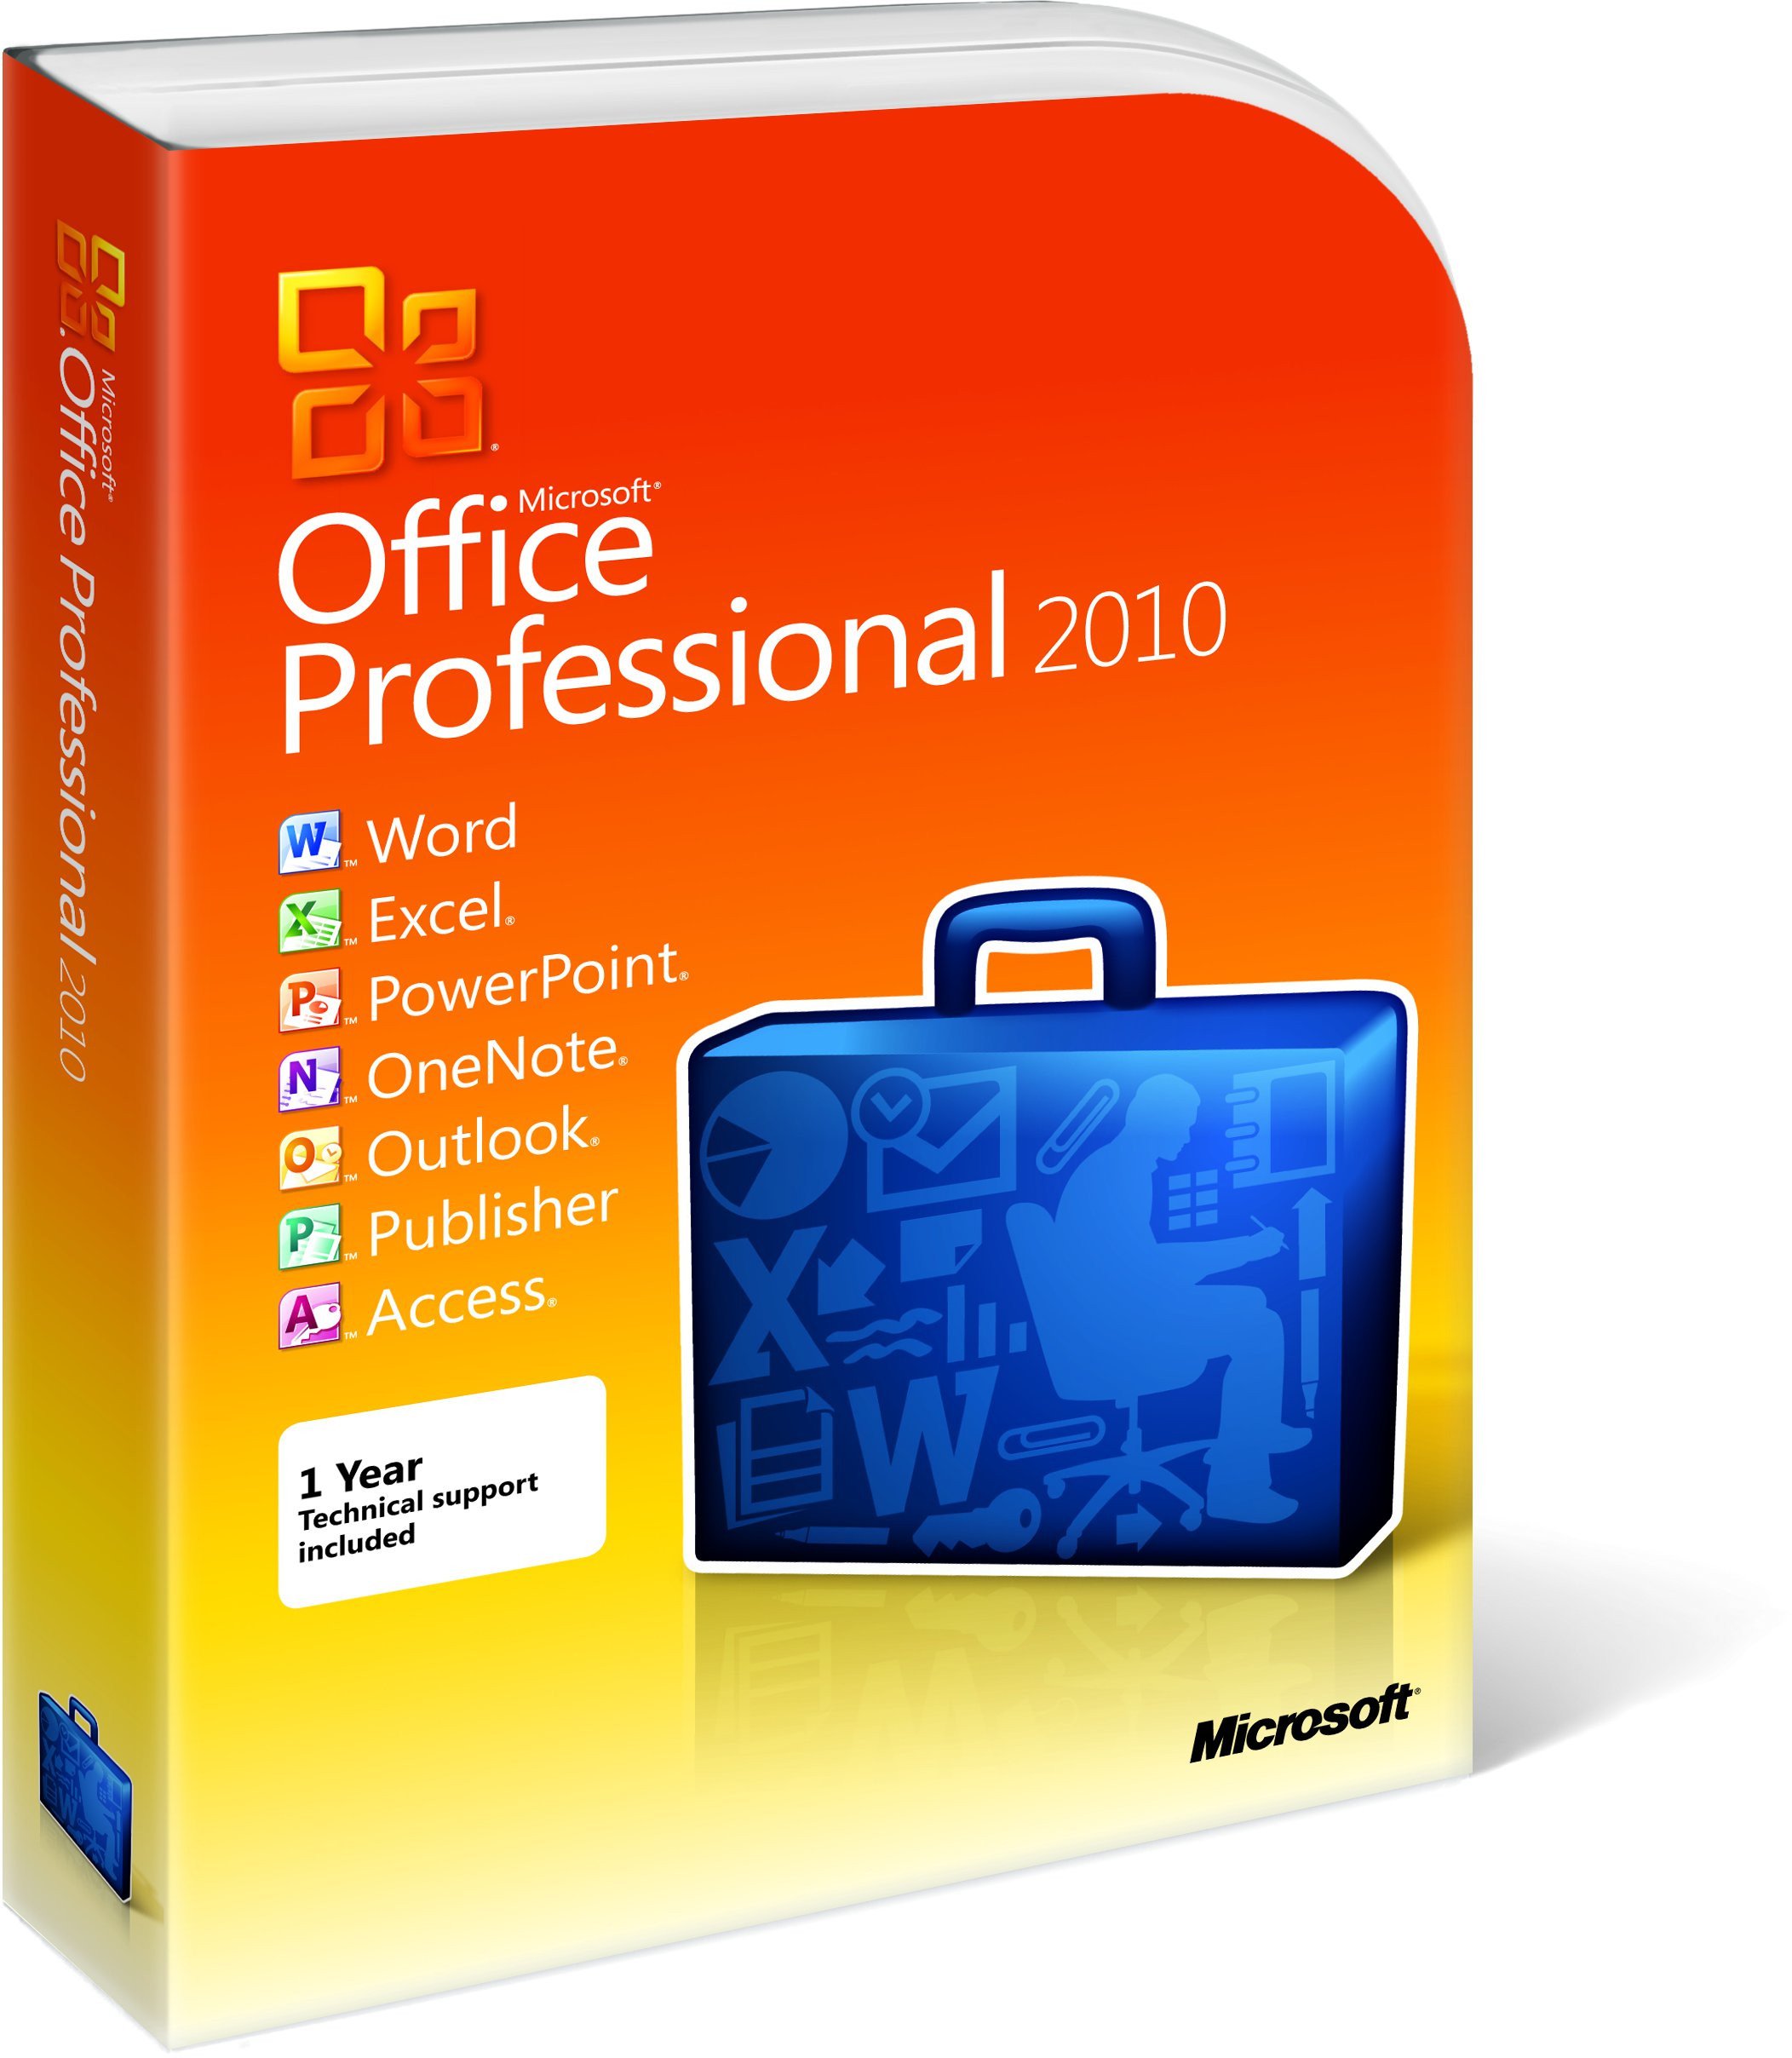 Microsoft Office 2010 Activated Forever